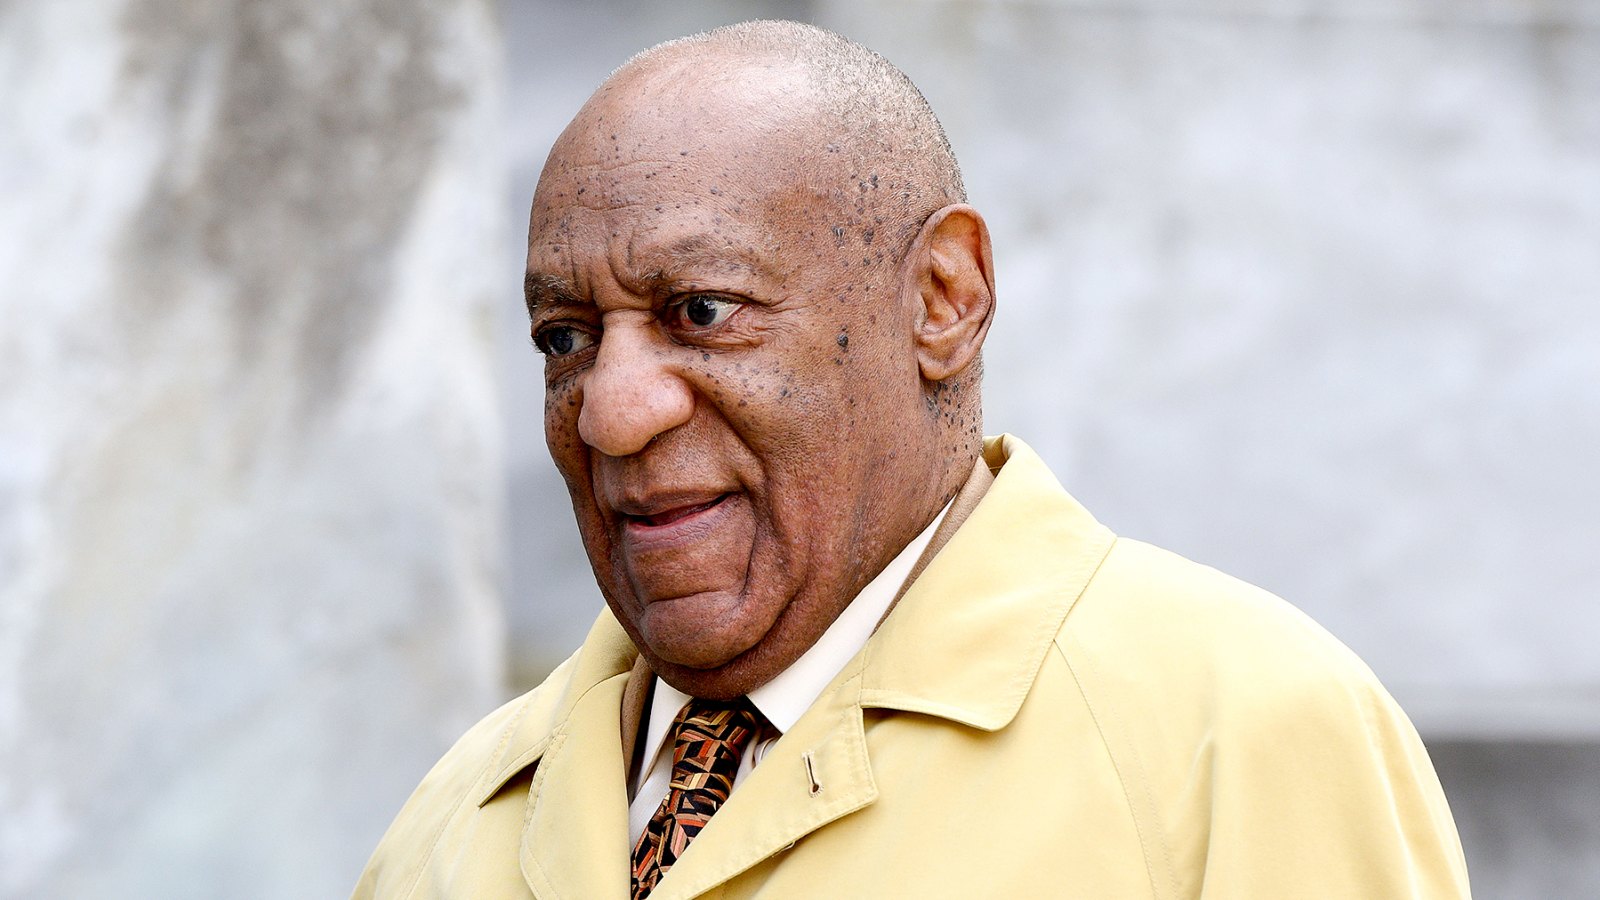 Bill Cosby spotted at the Montgomery County court house in Norristown, PA attending a new hearing on his sexual assault case February 27, 2017.